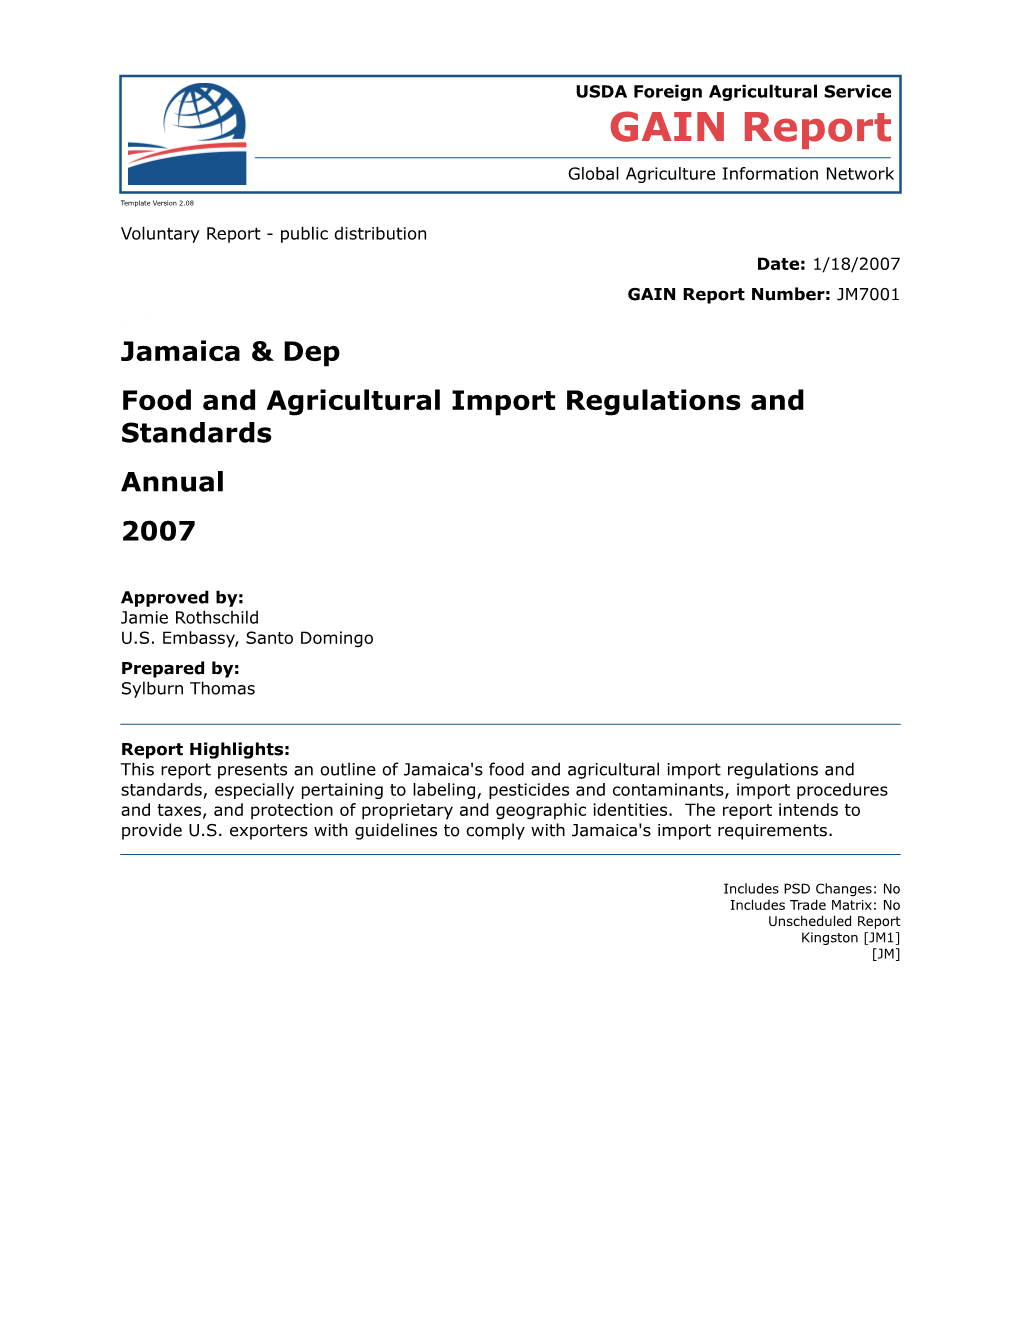 Food and Agricultural Import Regulations and Standards s2